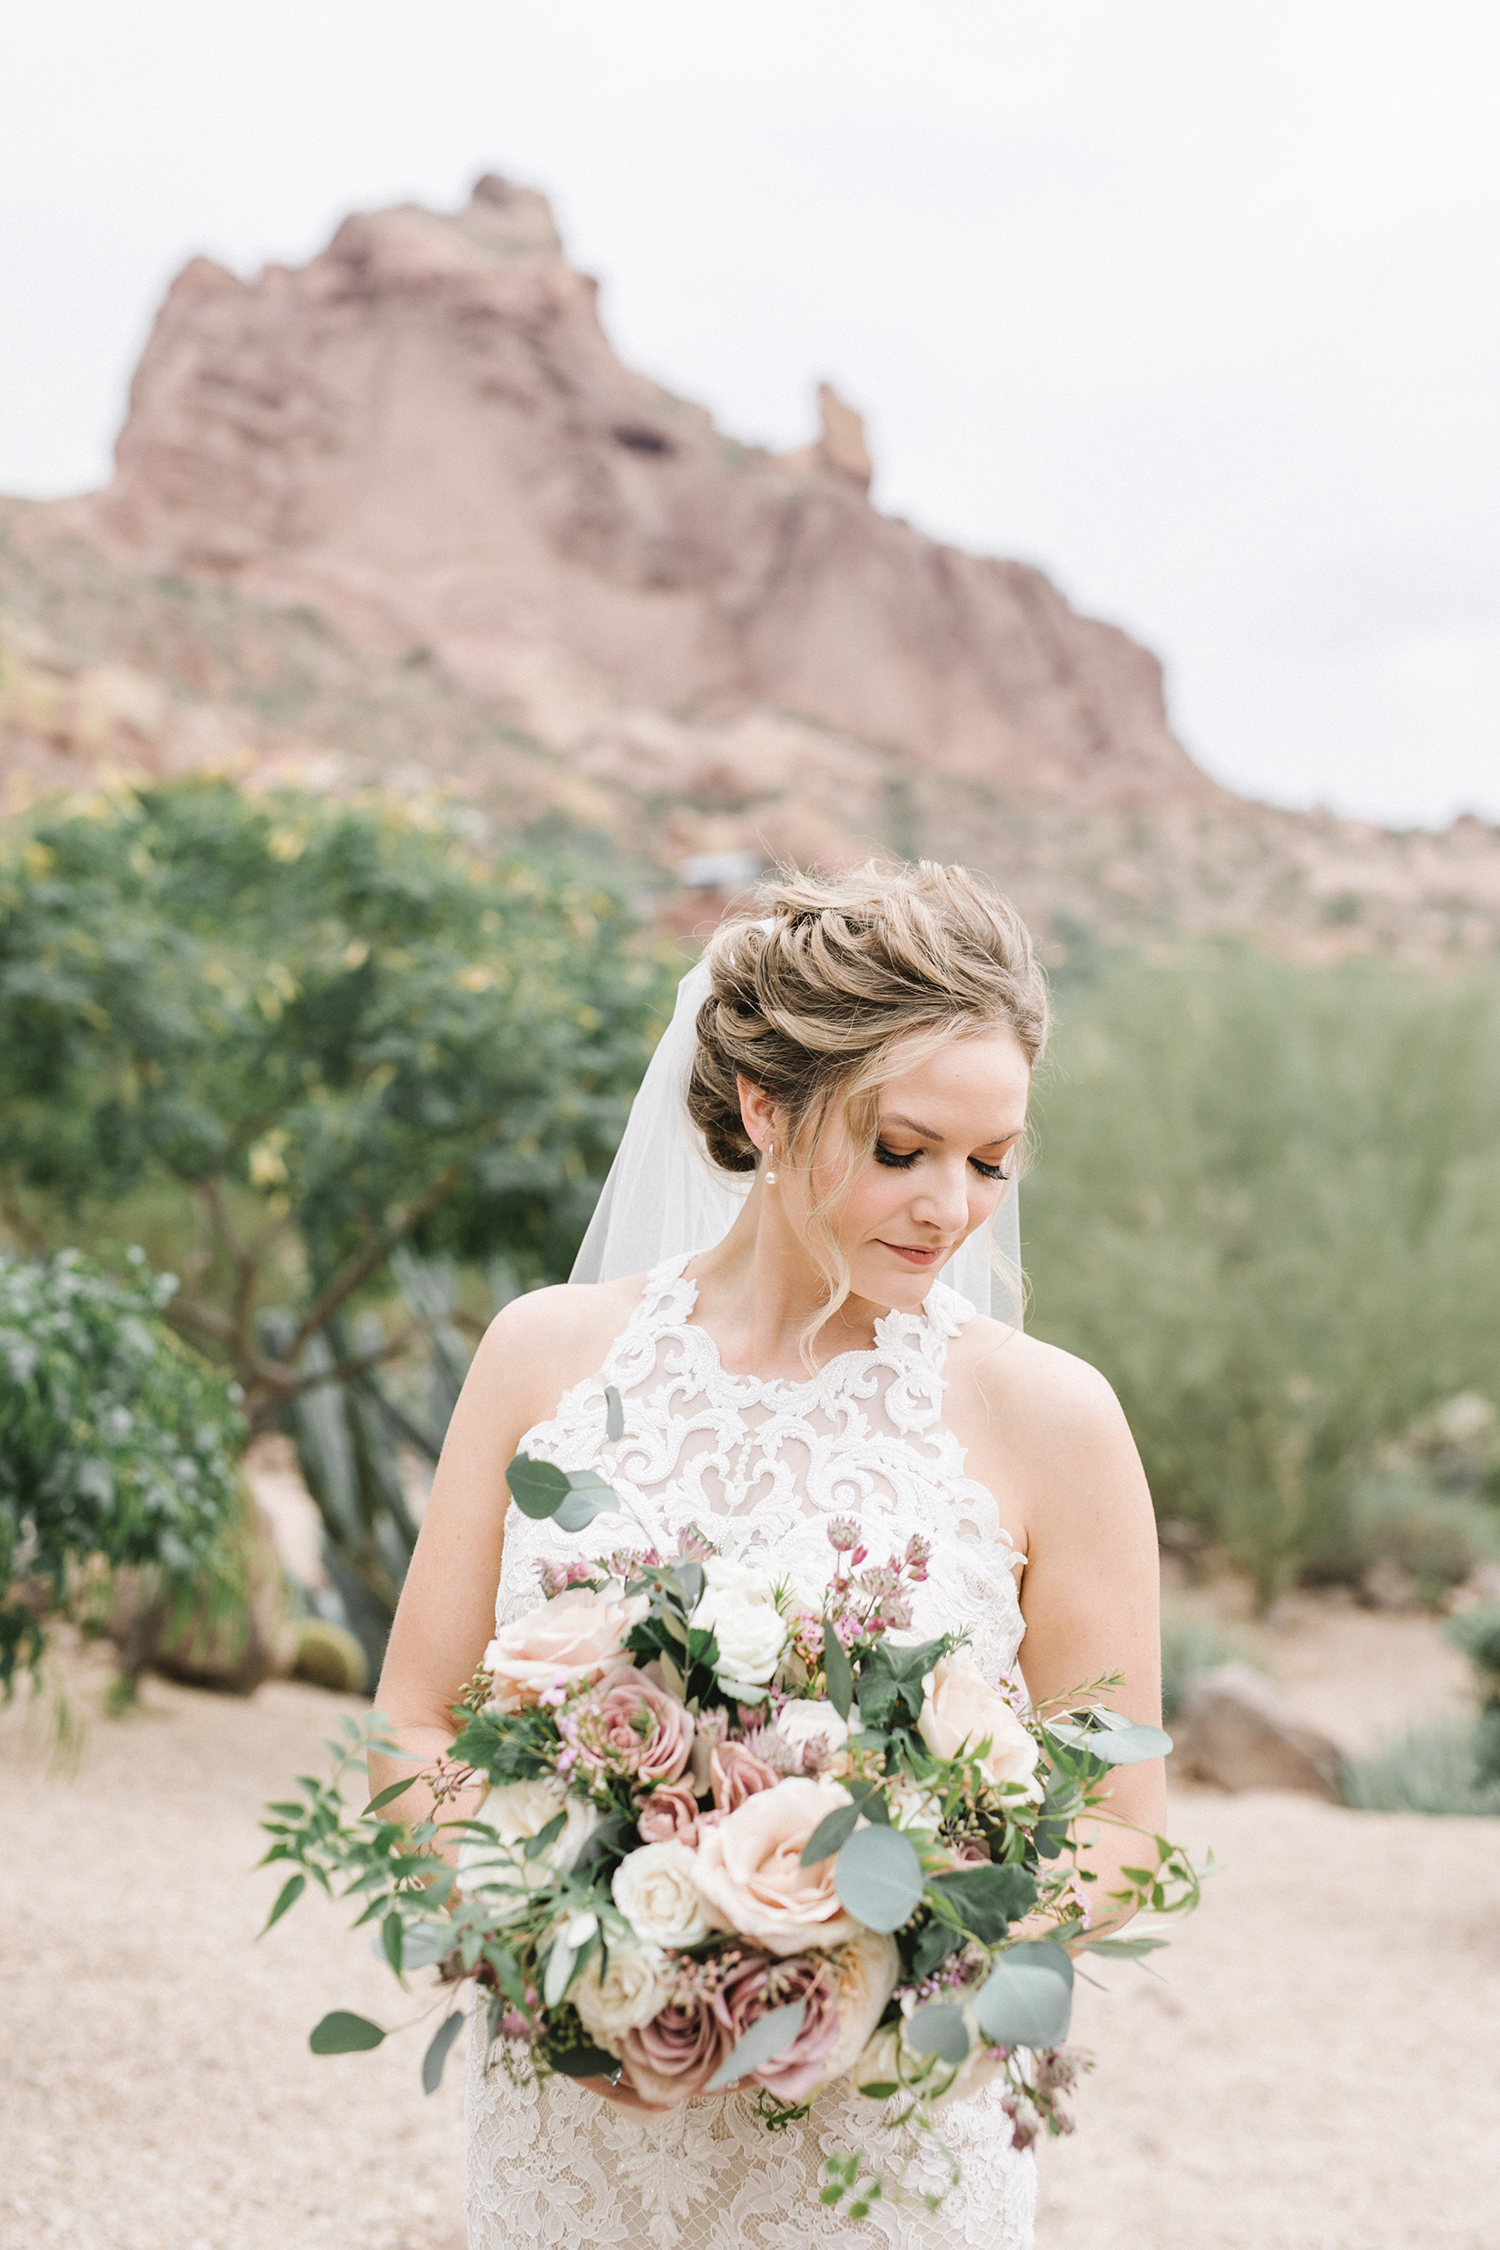 Hannah and Steven's Wedding at Sanctuary Resort in Scottsdale, Arizona. Get a look inside on the blog! #ArizonaWedding #ArizonaWeddingPhotographer #DesertWedding #SanctuaryResort #ScottsdaleArizona #WeddingIdeas #WeddingDecor